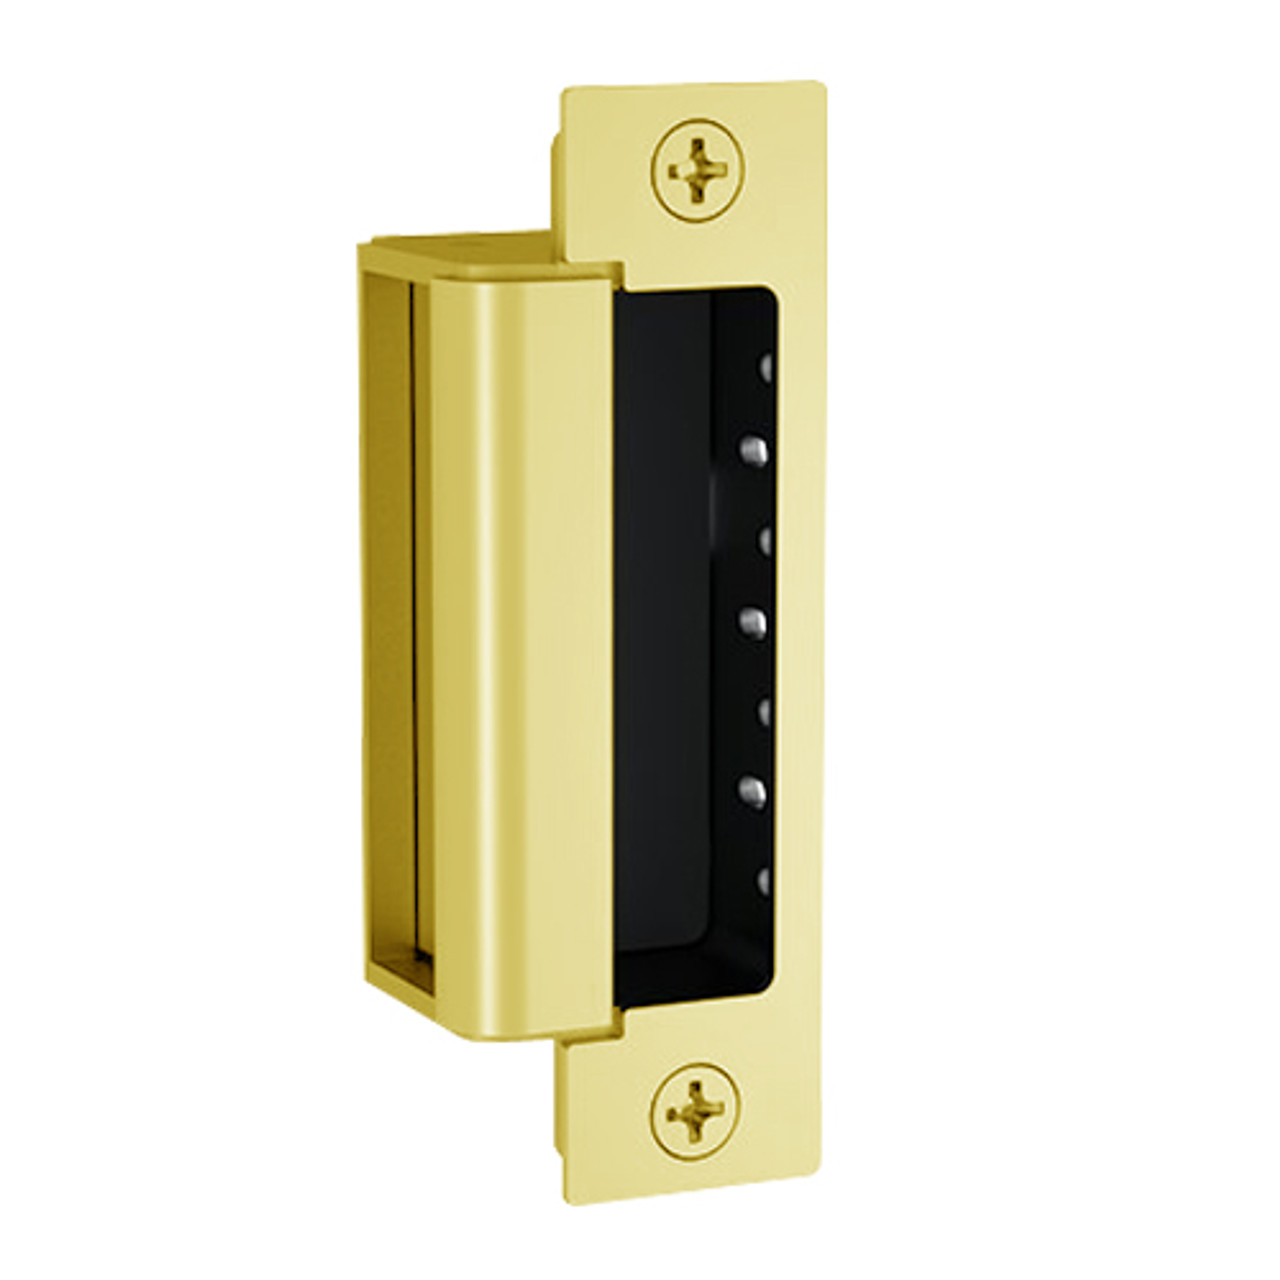 1600-CS-LMS-605 Hes 1600 Series Dynamic Complete Low Profile Electric Strike for Latchbolt and Deadbolt Lock with Lock Monitor & Strike Monitor in Bright Brass